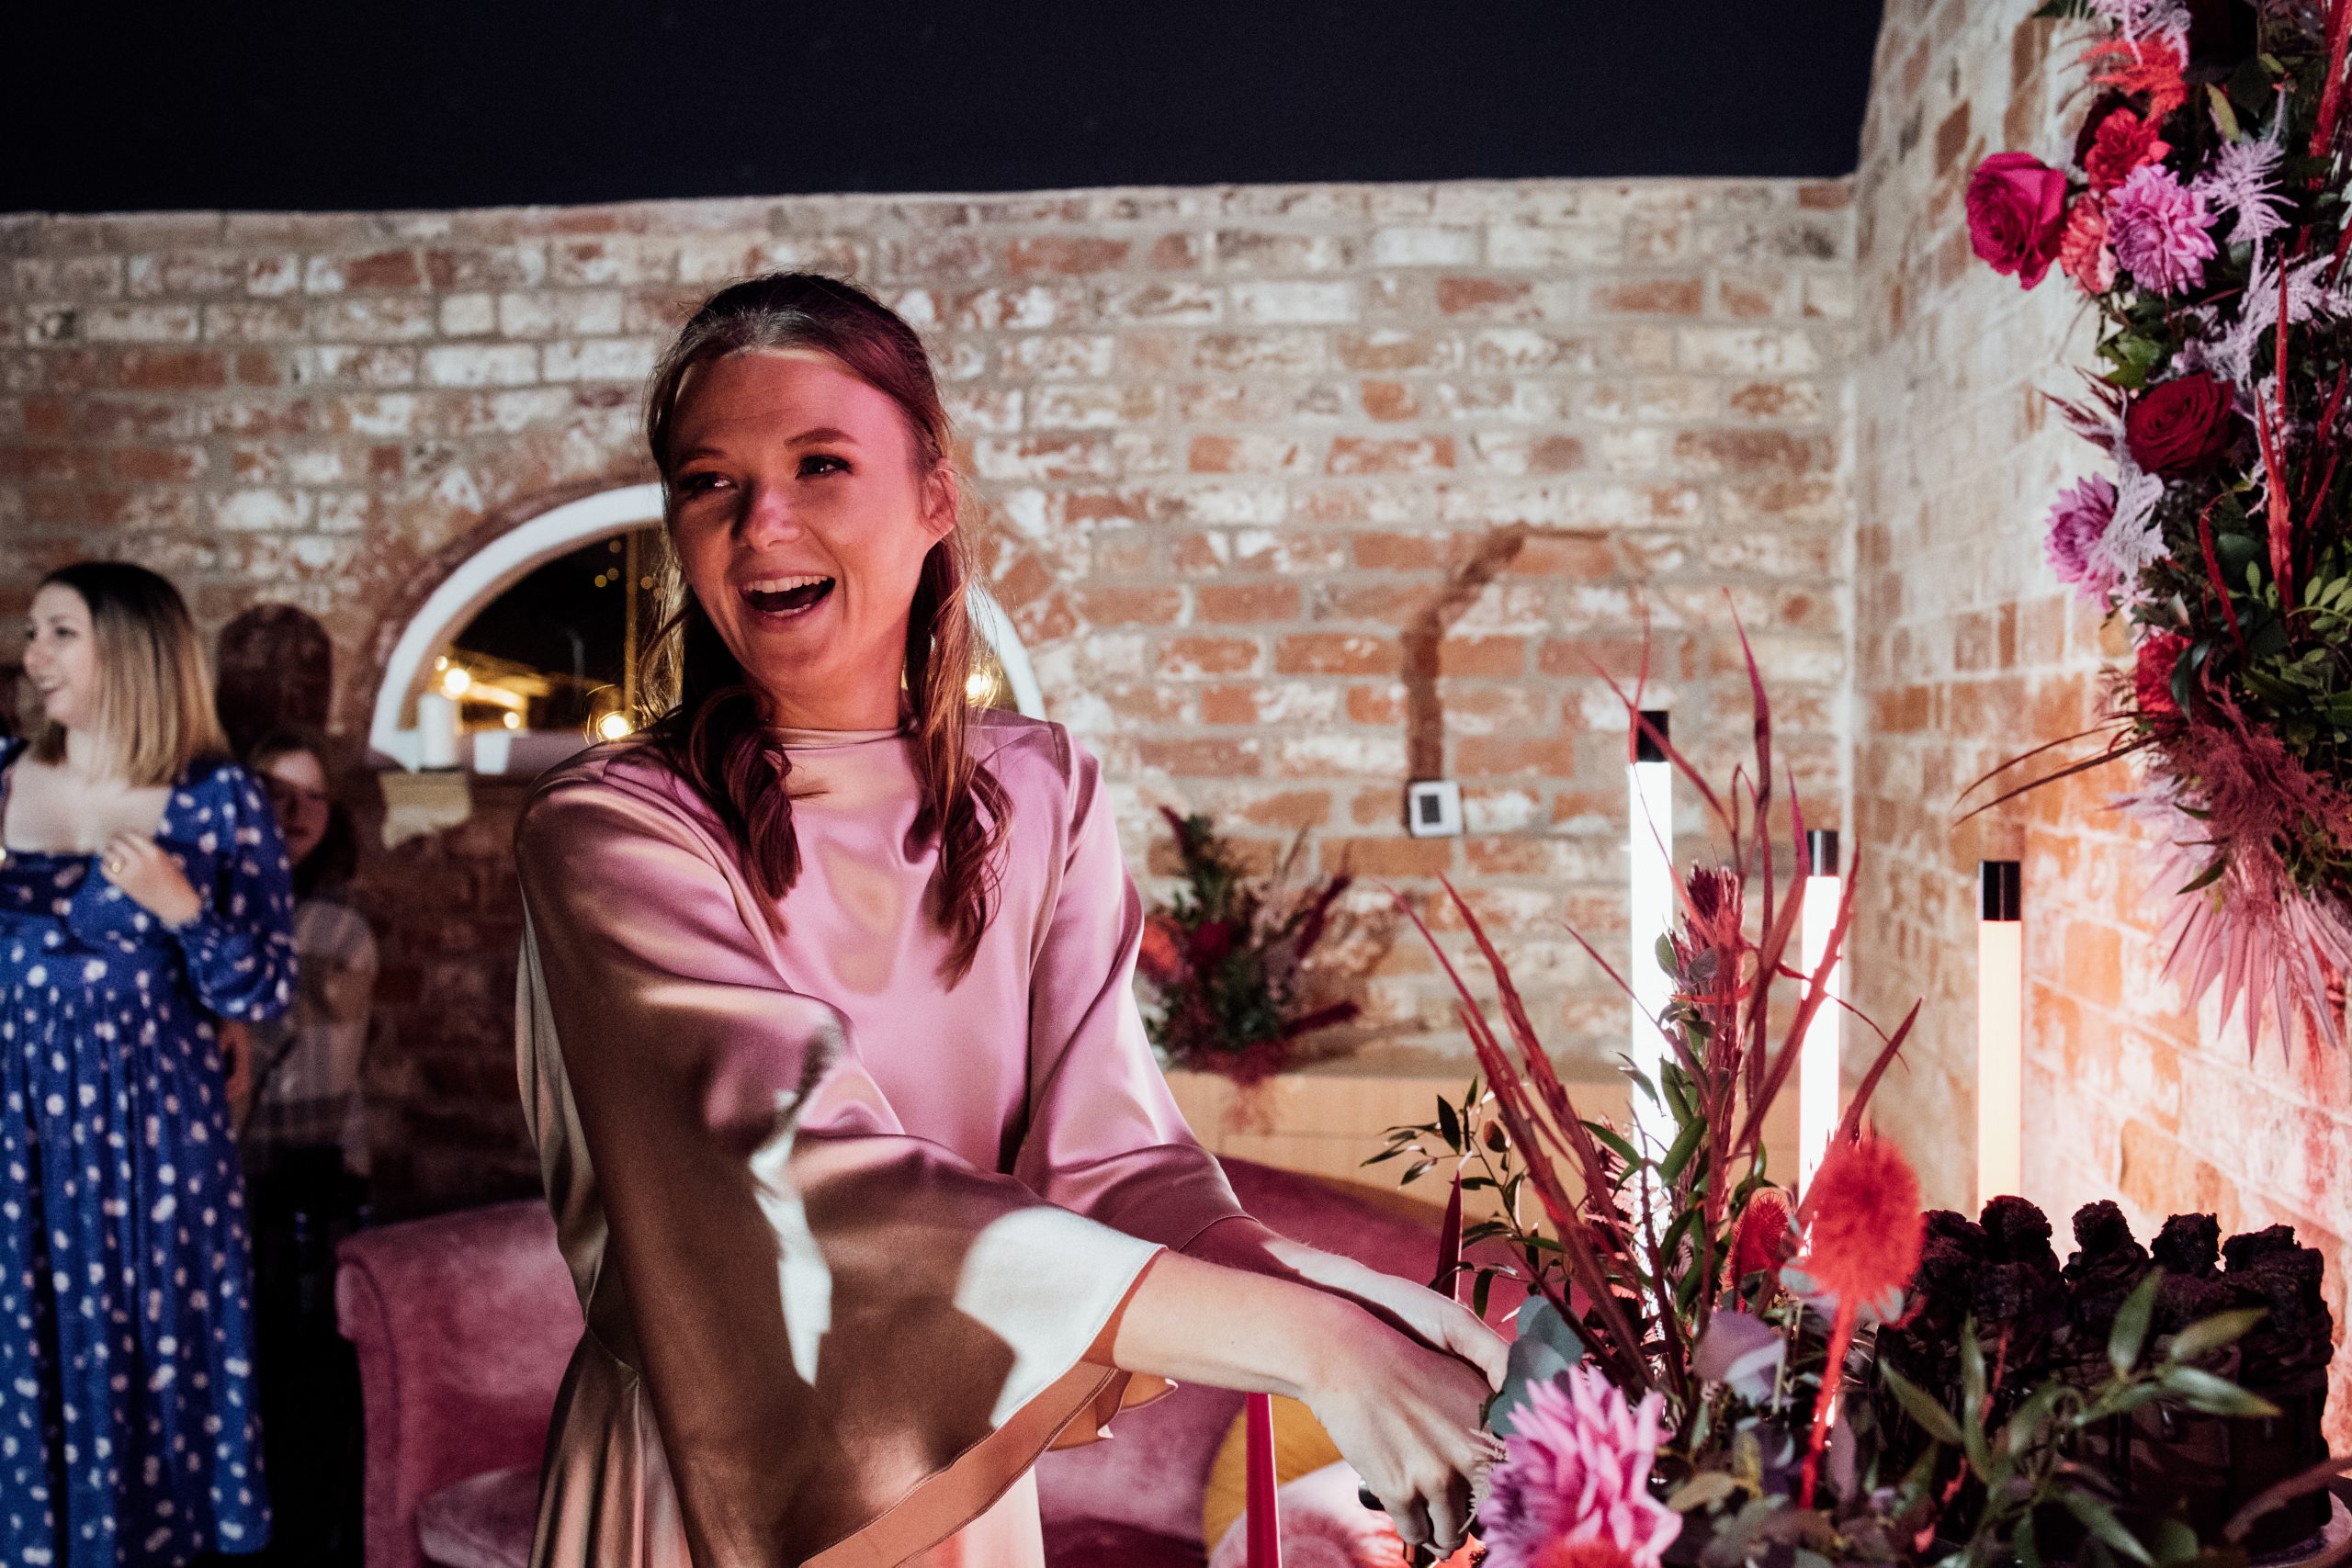 A happy bride with pink florals and neon stands in a barn venue